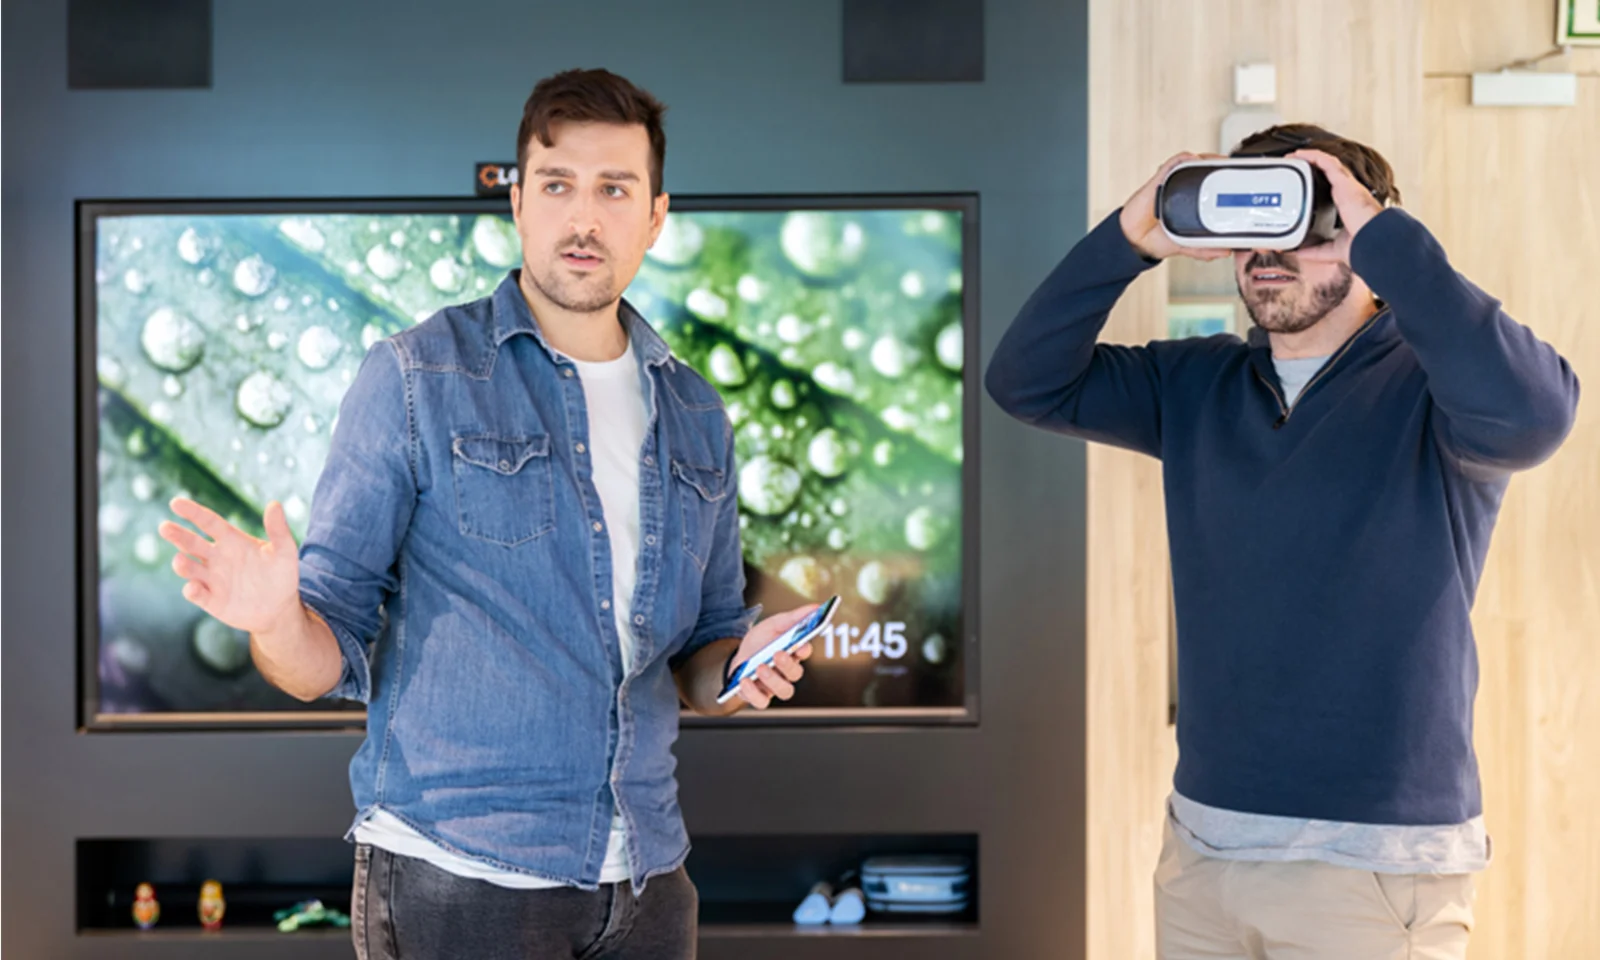 This image captures an interactive session in an innovation lab where two men are engaging with advanced technologies. One man is wearing a virtual reality headset, experiencing immersive content, while the other man is holding a smartphone and possibly explaining or presenting something. The background features a large screen displaying vivid visuals, enhancing the modern and tech-centric ambiance of the innovation lab. This setting reflects the integration of cutting-edge technologies and collaborative environments aimed at fostering innovation and creativity.